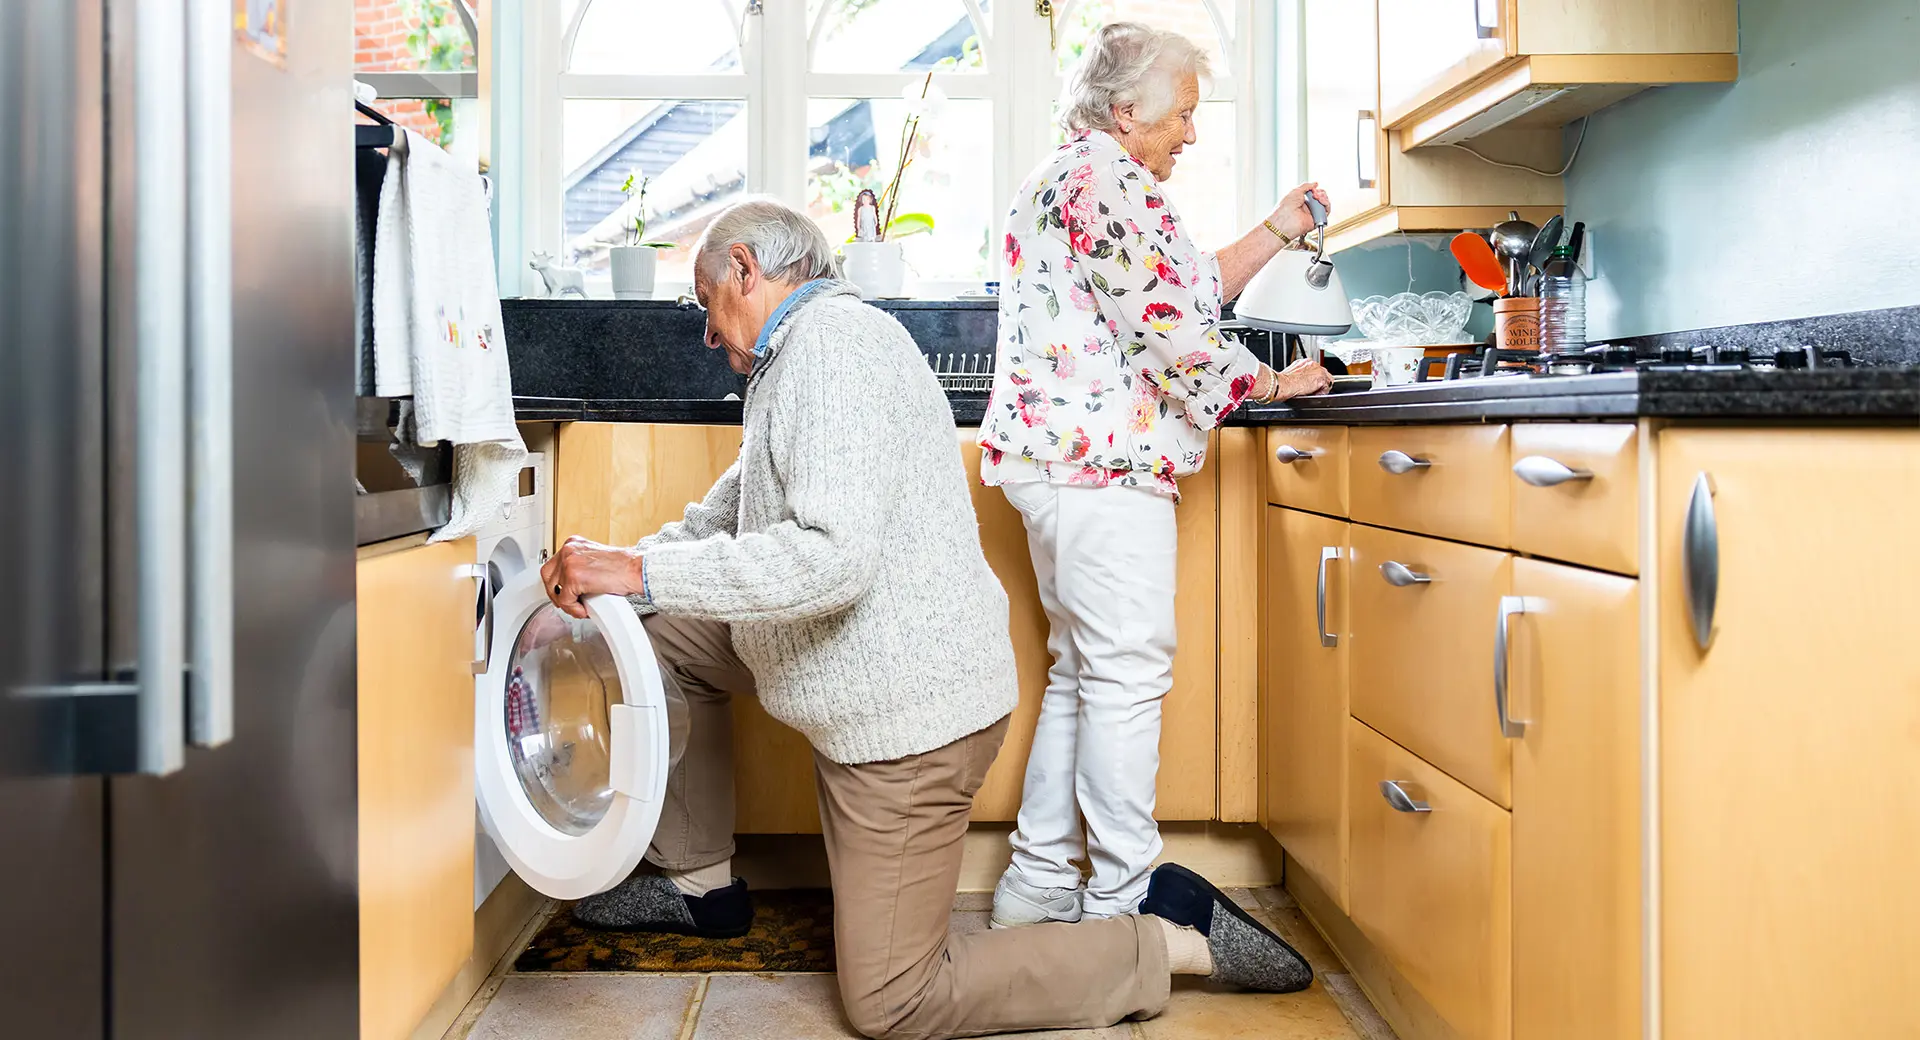 An elderly couple in their kitchen, one prepares food while the other puts a towel into the washing machine